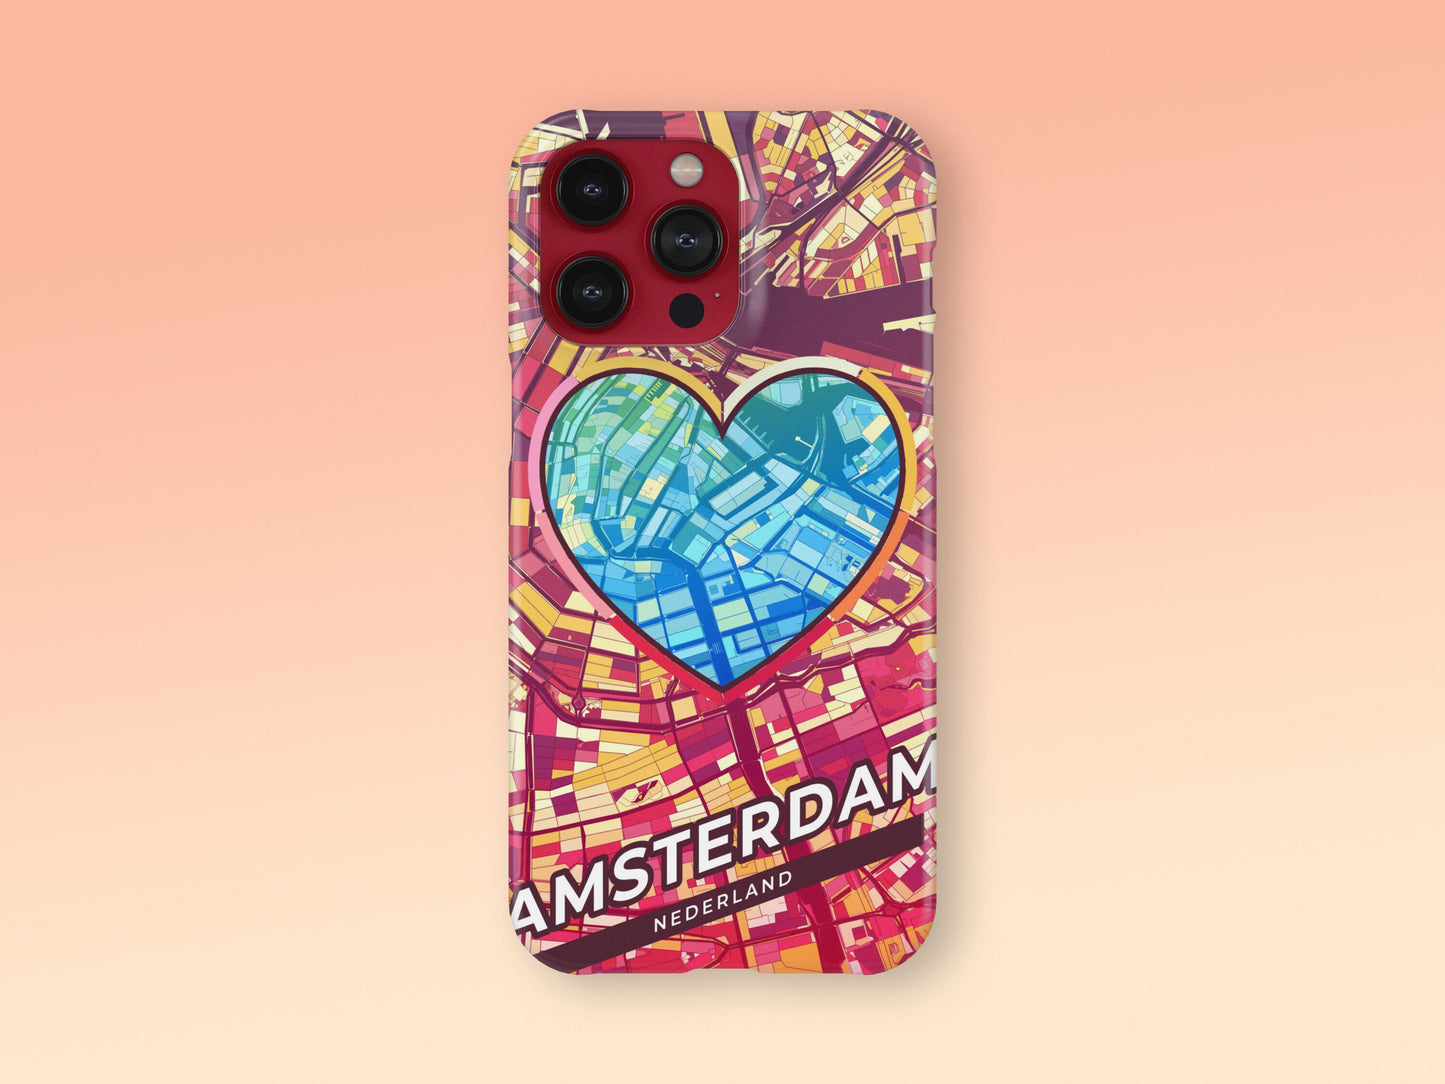 Amsterdam Netherlands slim phone case with colorful icon. Birthday, wedding or housewarming gift. Couple match cases. 2